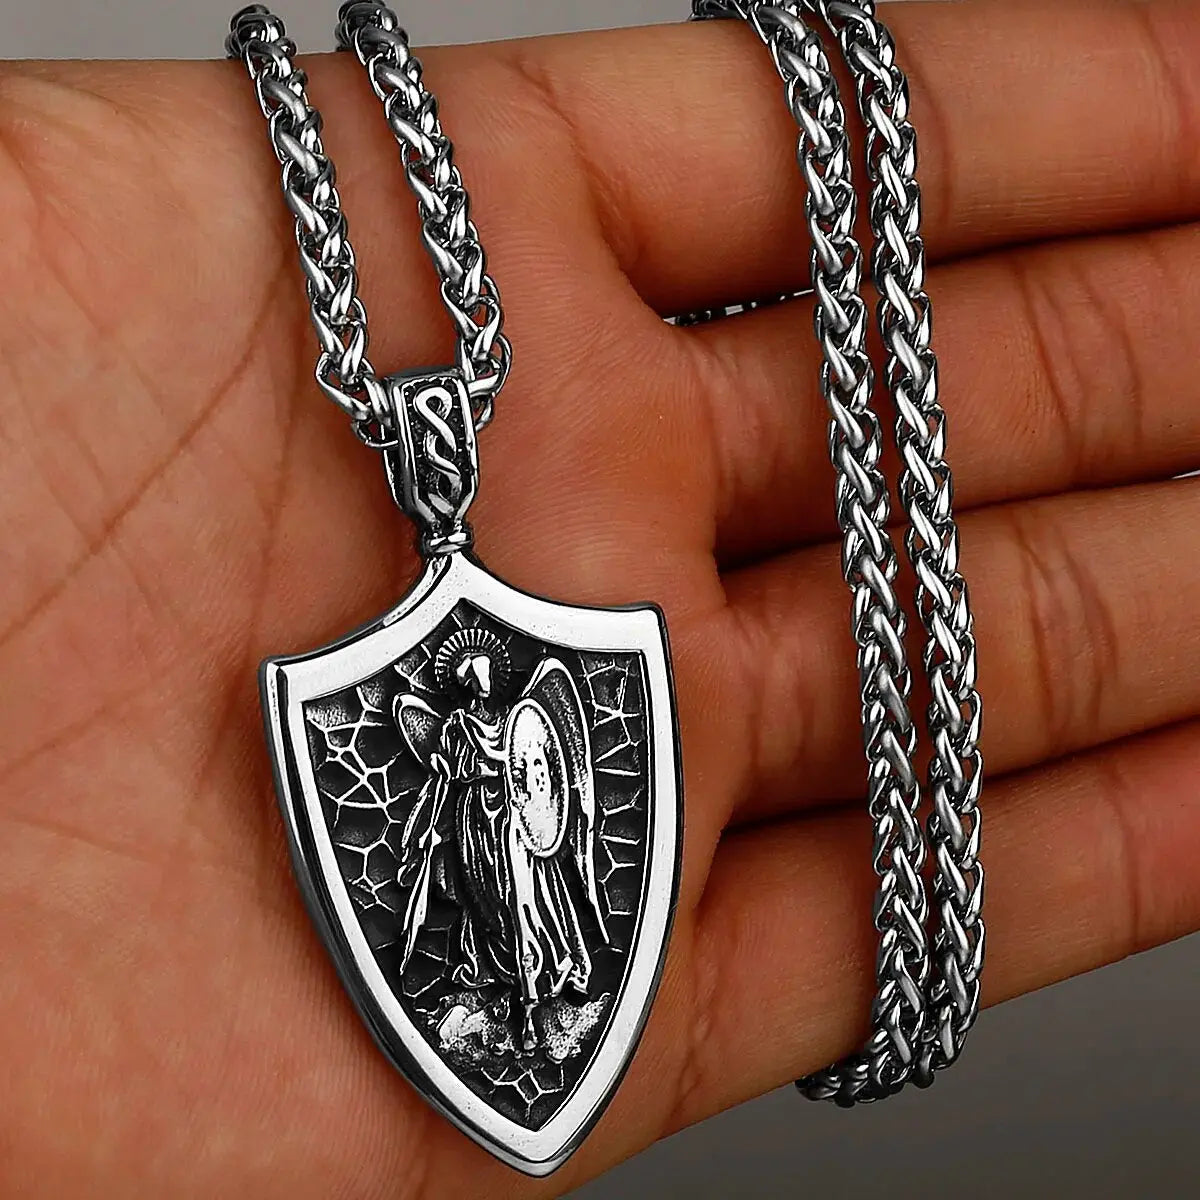 a hand holding a silver chain with a pendant on it